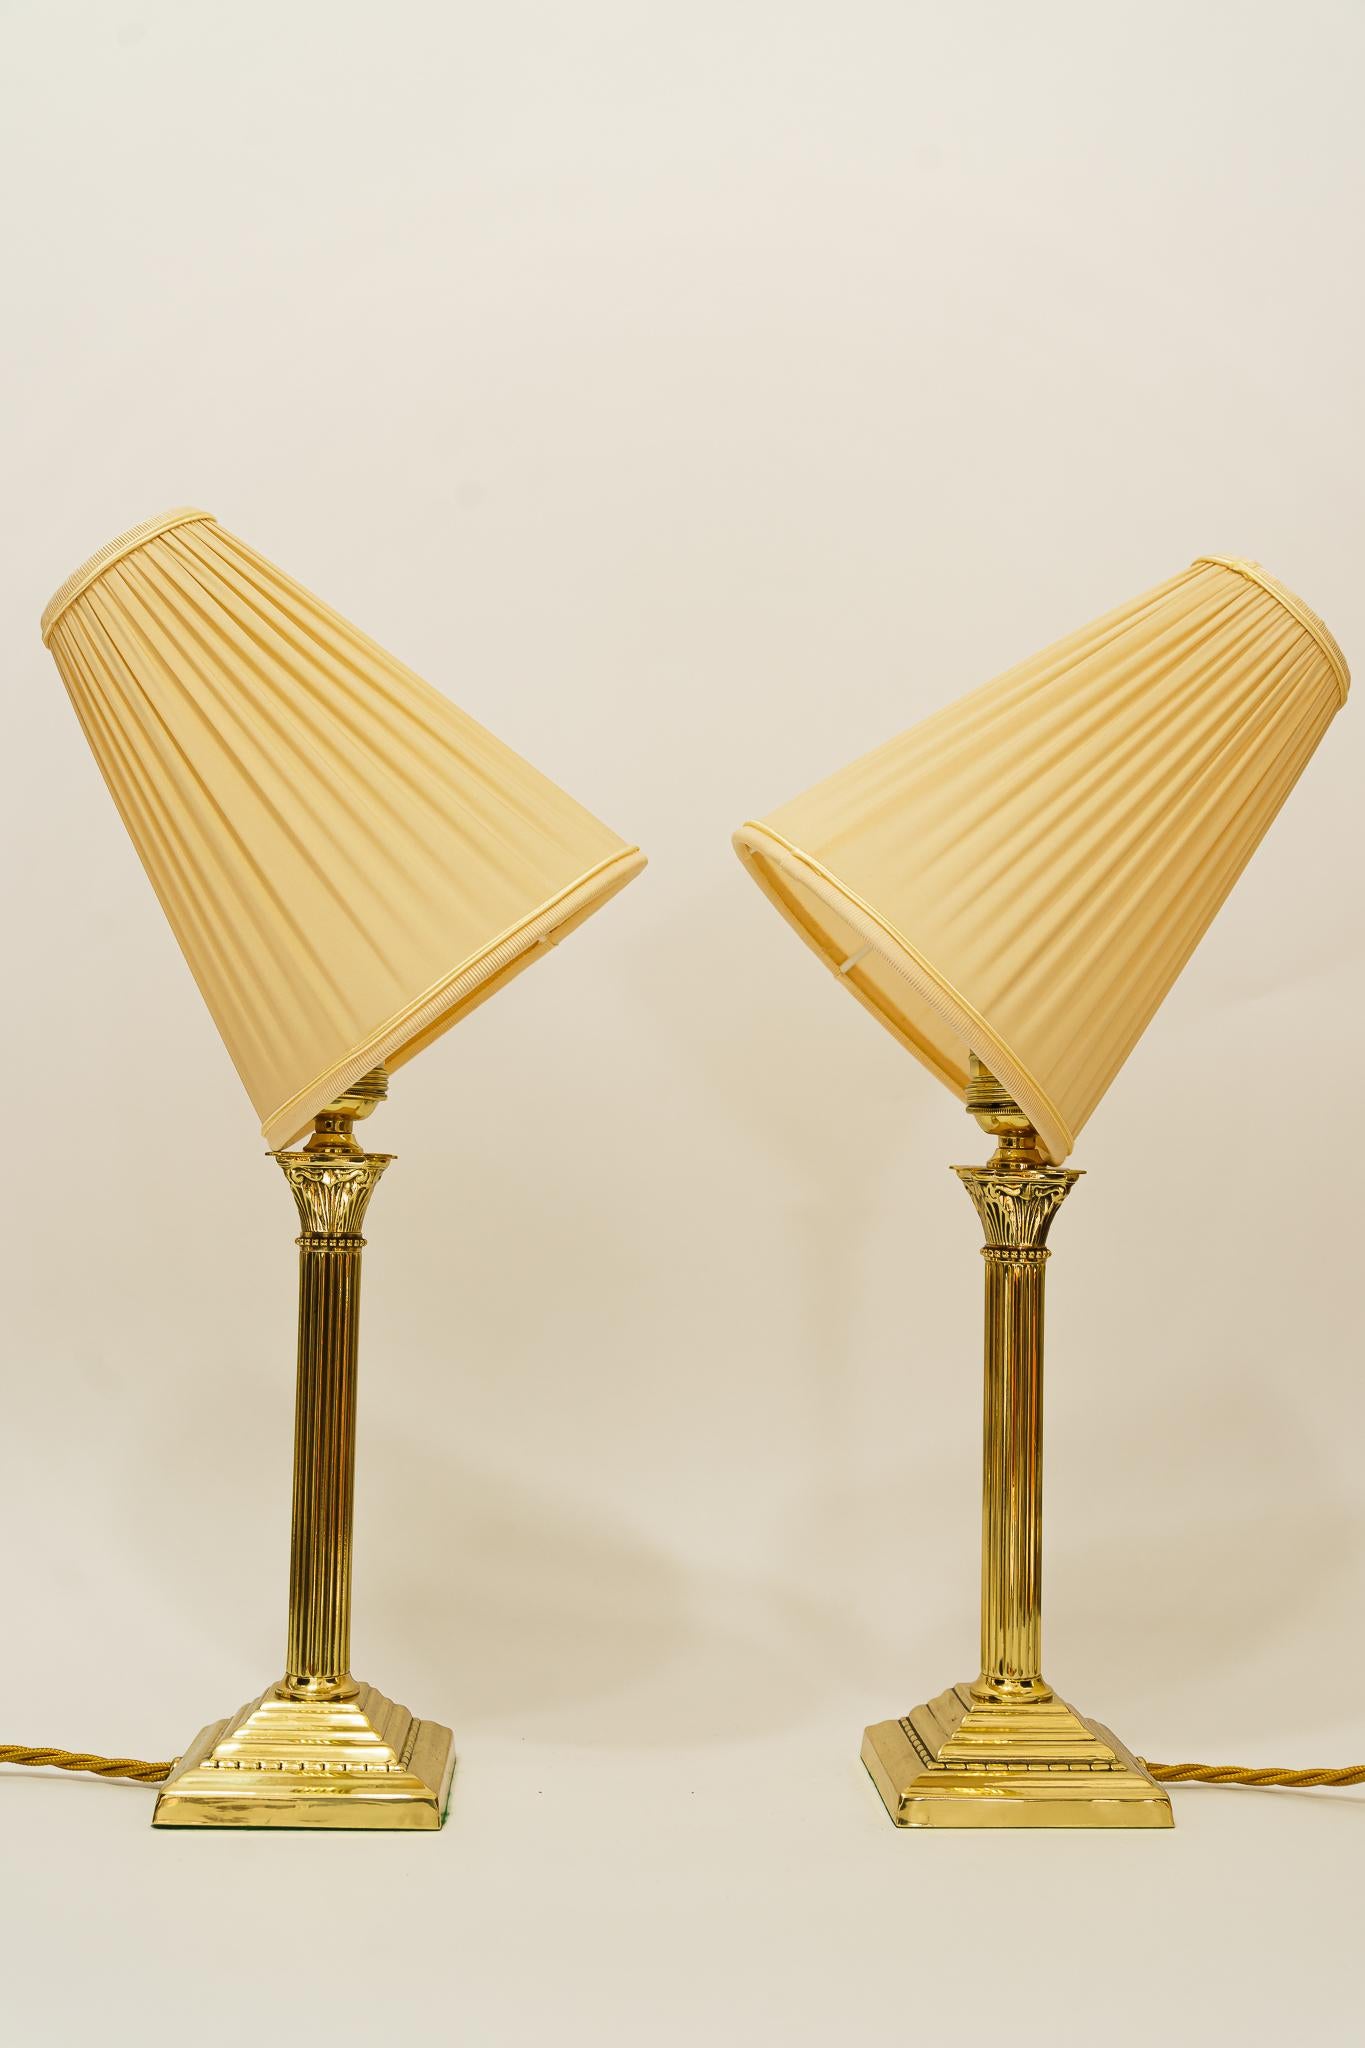 2 Art Deco table lamps vienna around 1920s
Brass polished and stove enameled
The fabric shade is replaced ( new ).